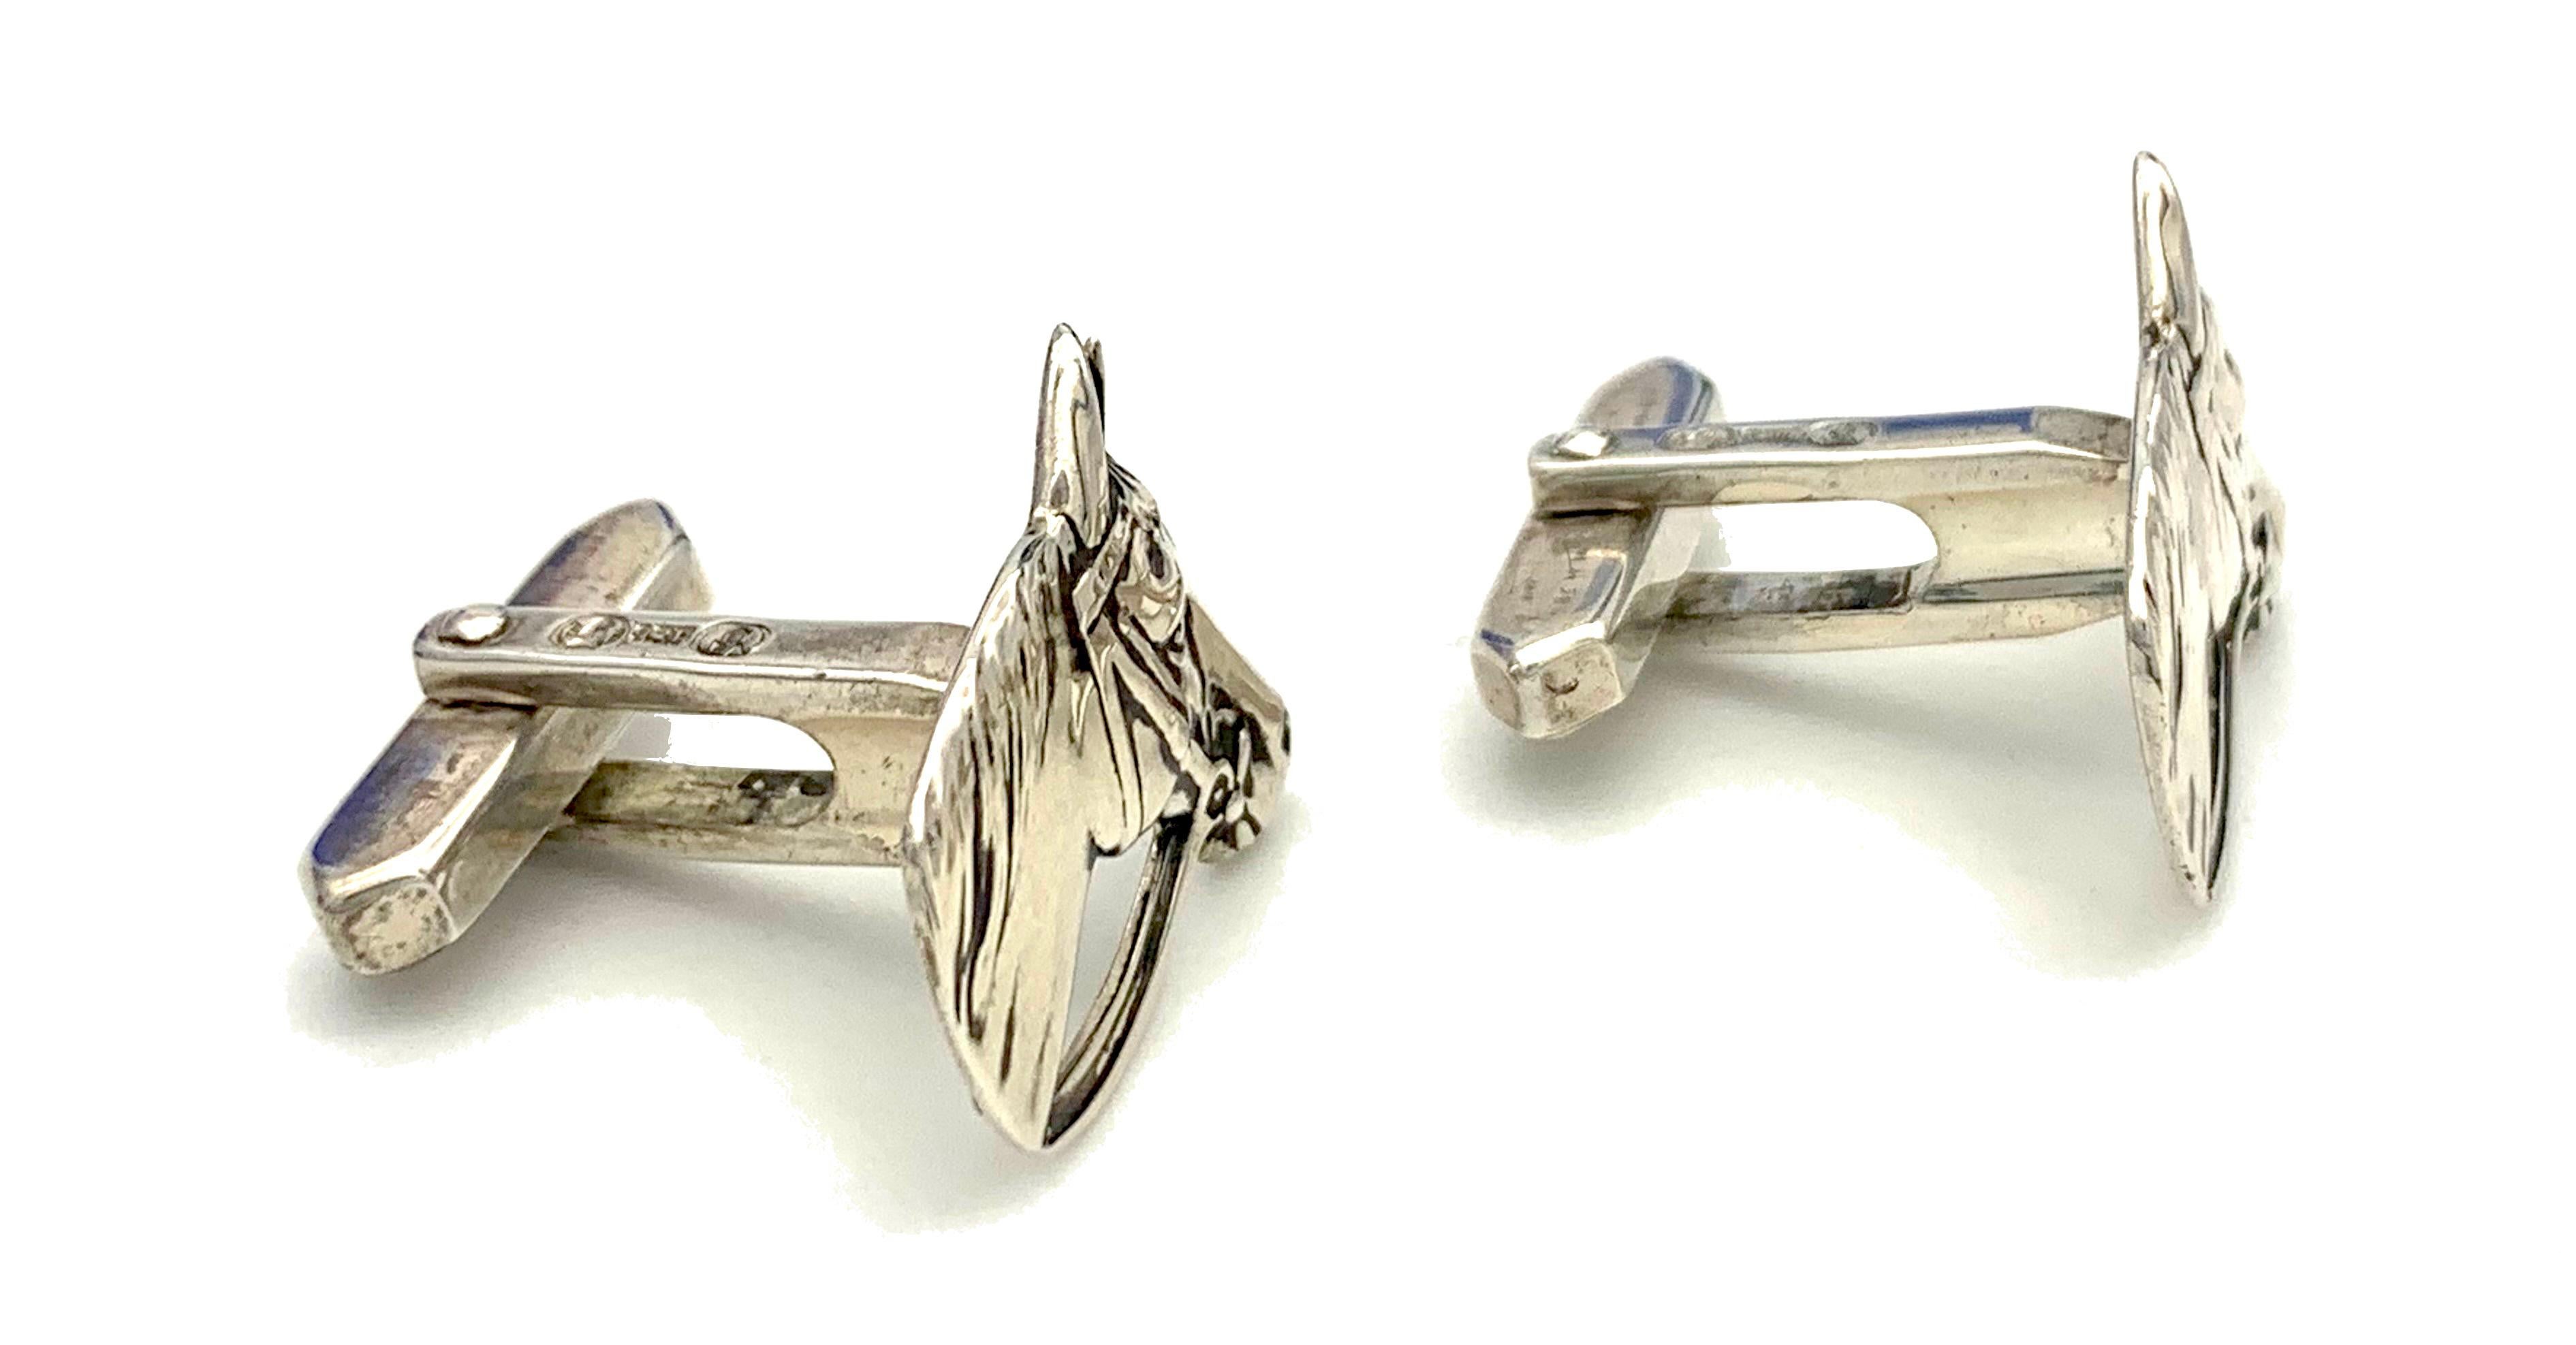 These cufflinks feature finely modelled horse heads and are made out of silver. The cufflinks are marked with the French double crab mark and are impressed 835. There is a maker's mark in an oval frame featuring a billy-goat with the letter G to its